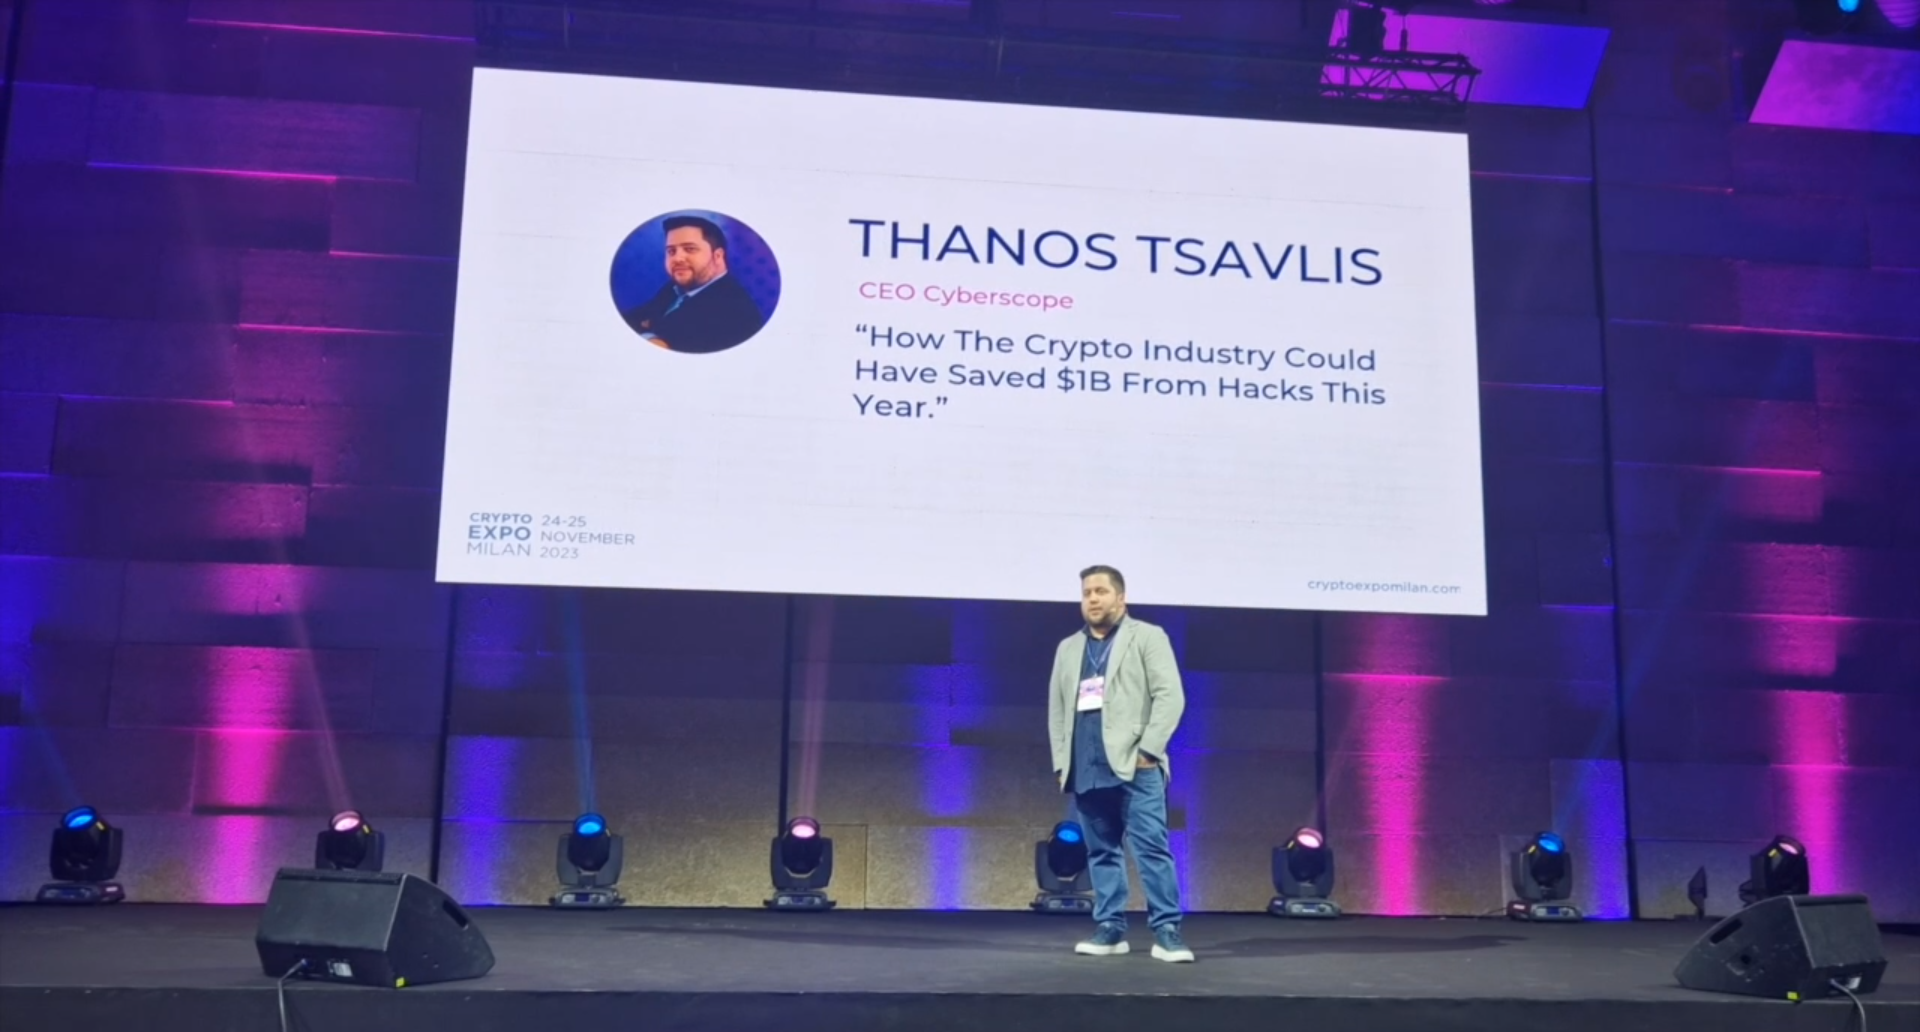 Thanos Tsavlis speech, titled "How the Crypto Industry Could Have Saved $1B from Hacks This Year." 